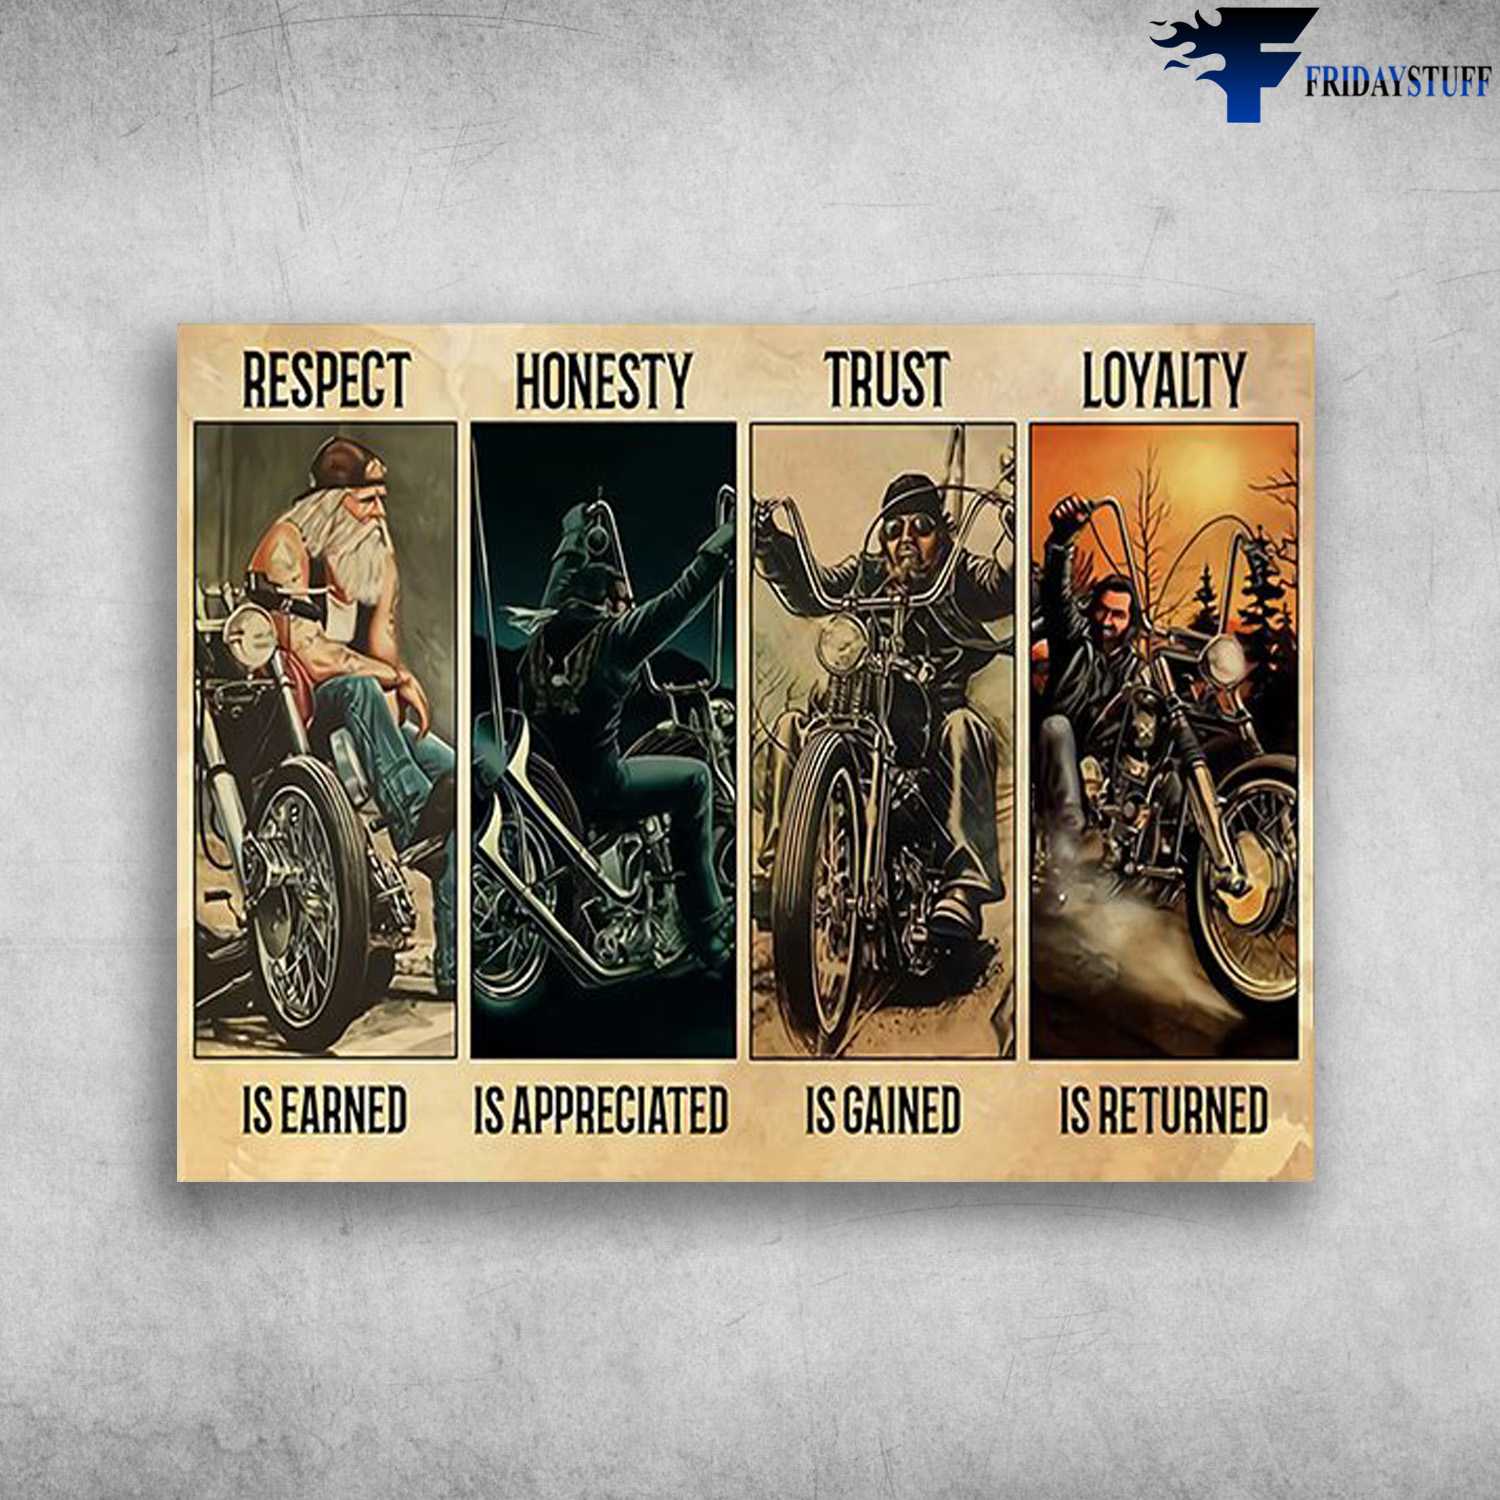 Motorcycle Old Man, Biker Poster, Respect Is Eared, Honestly Is Appreciated, Trust Is Gained, Loyalty Is Returned